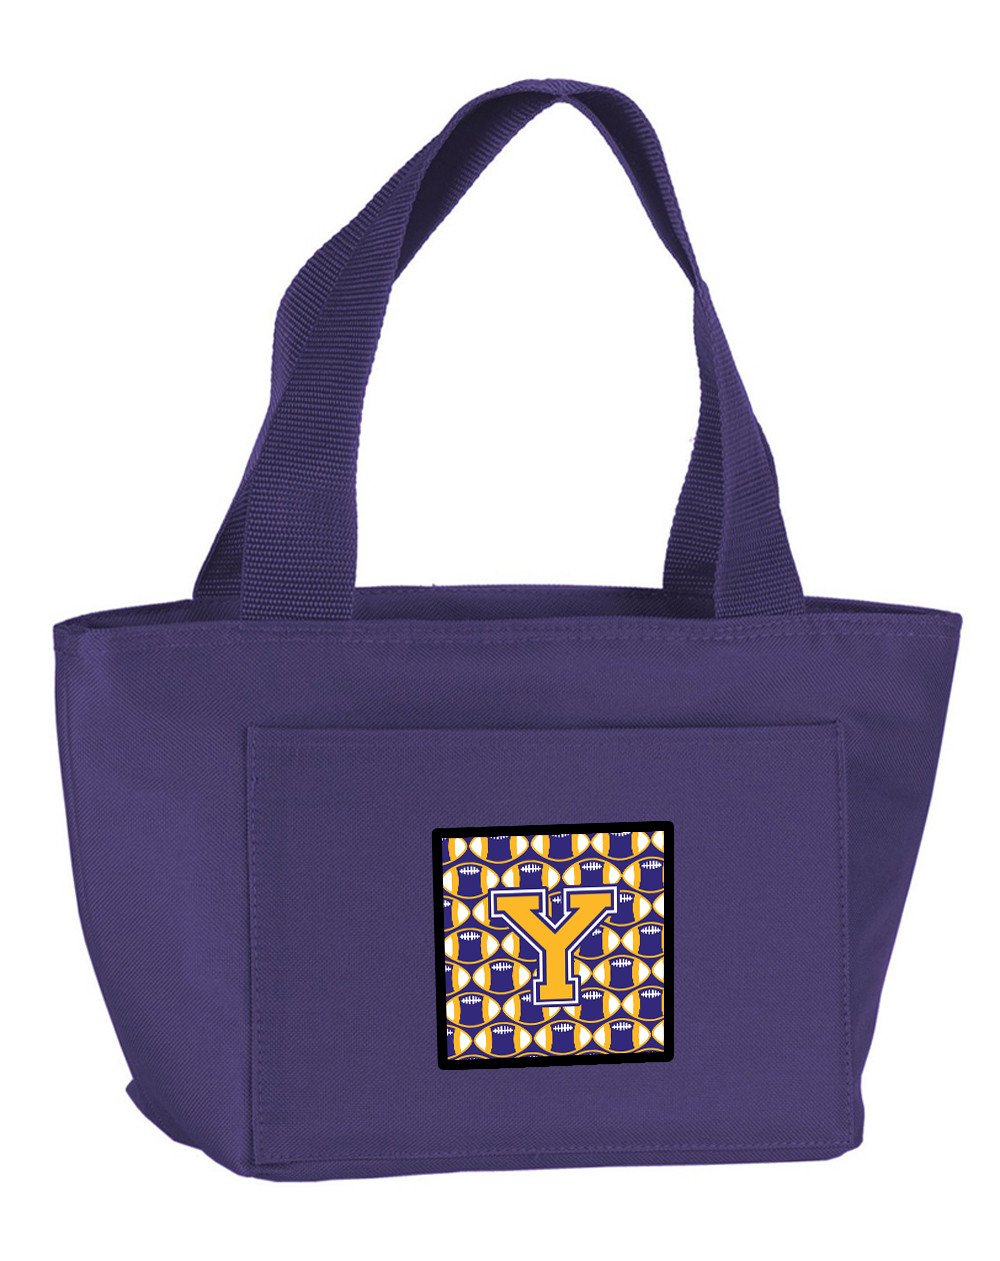 Letter Y Football Purple and Gold Lunch Bag CJ1064-YPR-8808 by Caroline's Treasures